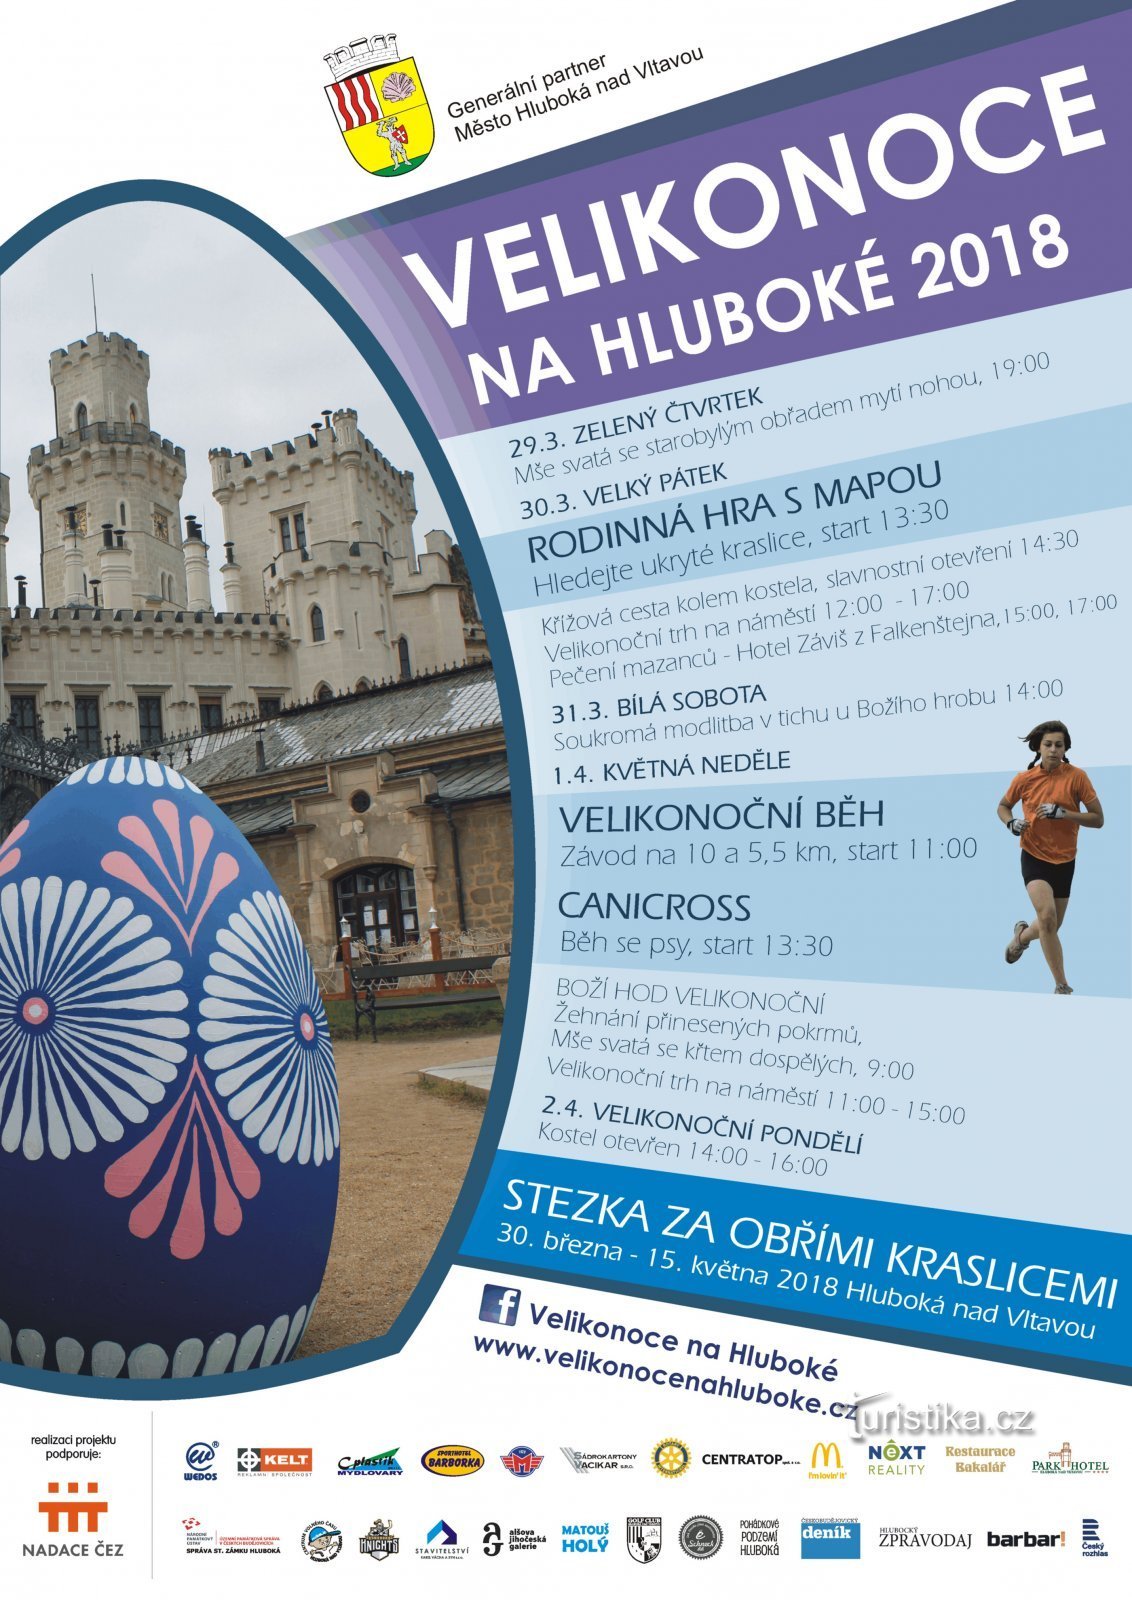 Easter in Hluboká again with sports and giant Easter eggs